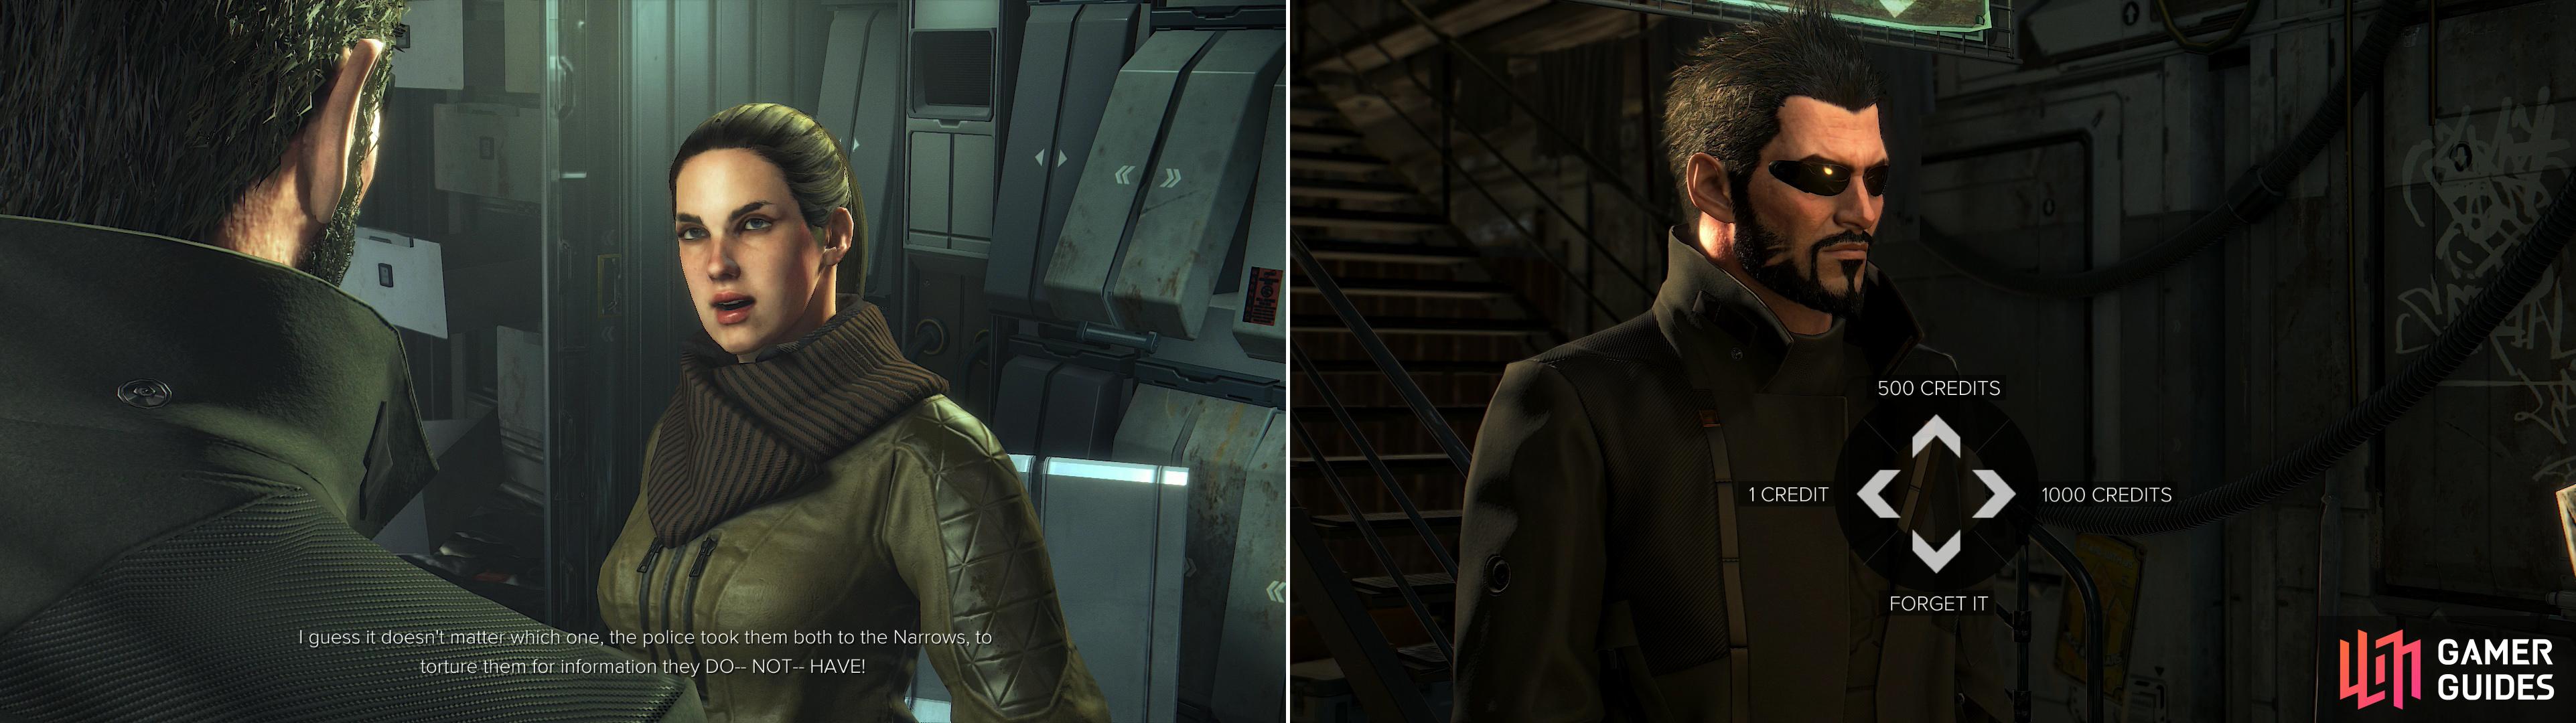 Visit the contact’s house to learn a bit of bad news (left). Bribe the police officer guarding the prison to get to speak to Tibor Sokol (right).